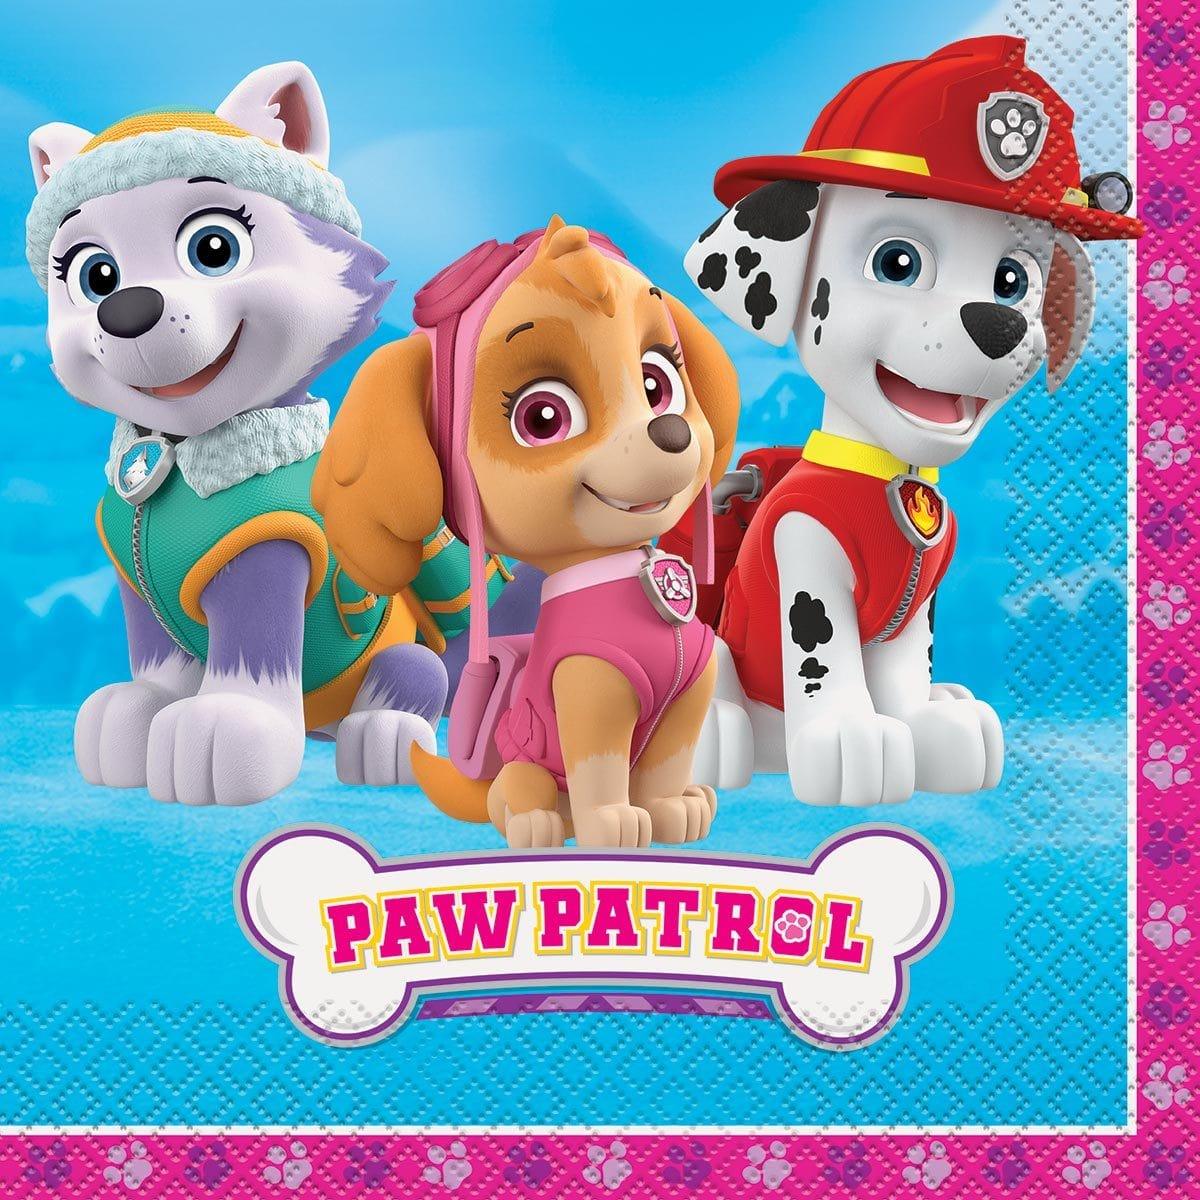 Buy Kids Birthday Paw Patrol Girl lunch napkins, 16 per package sold at Party Expert